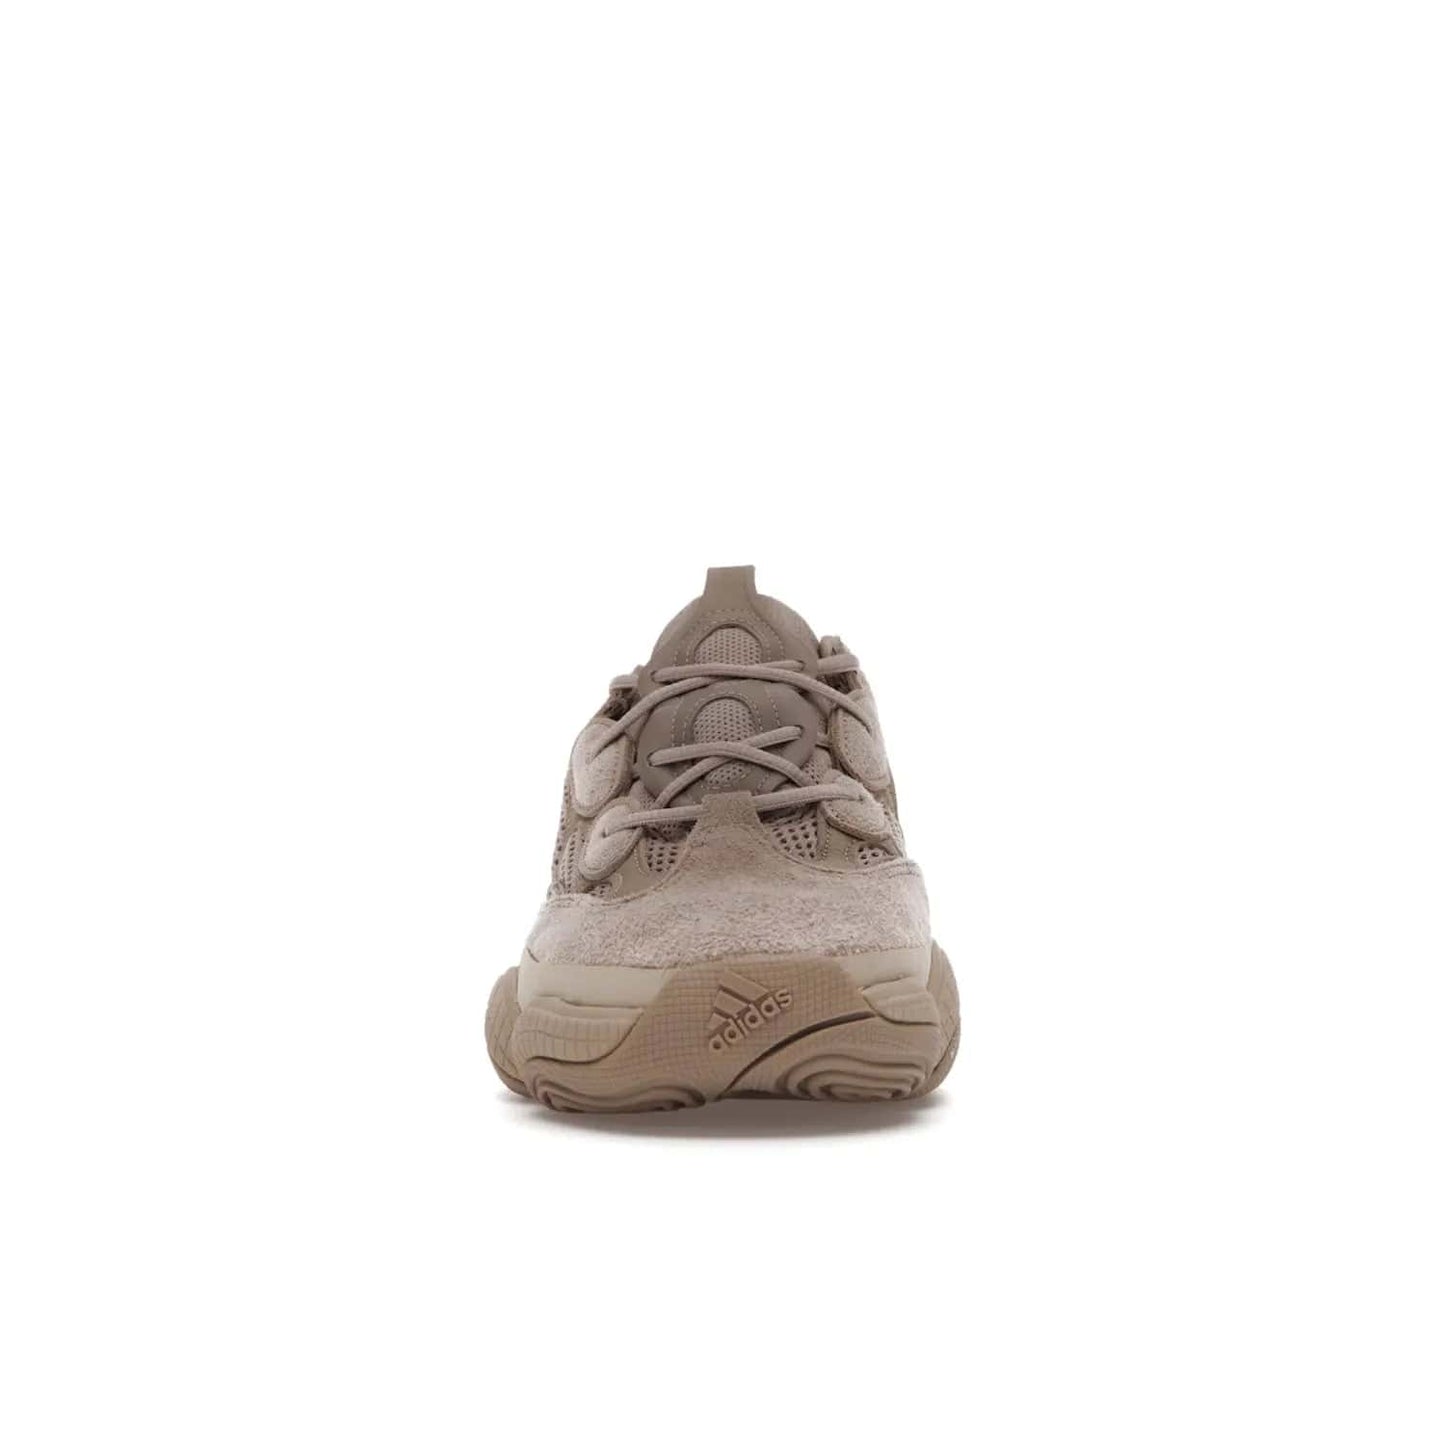 adidas Yeezy 500 Taupe Light - Image 10 - Only at www.BallersClubKickz.com - The adidas Yeezy 500 Taupe Light combines mesh, leather, and suede, with a durable adiPRENE sole for an eye-catching accessory. Reflective piping adds the perfect finishing touches to this unique silhouette. Ideal for any wardrobe, releasing in June 2021.